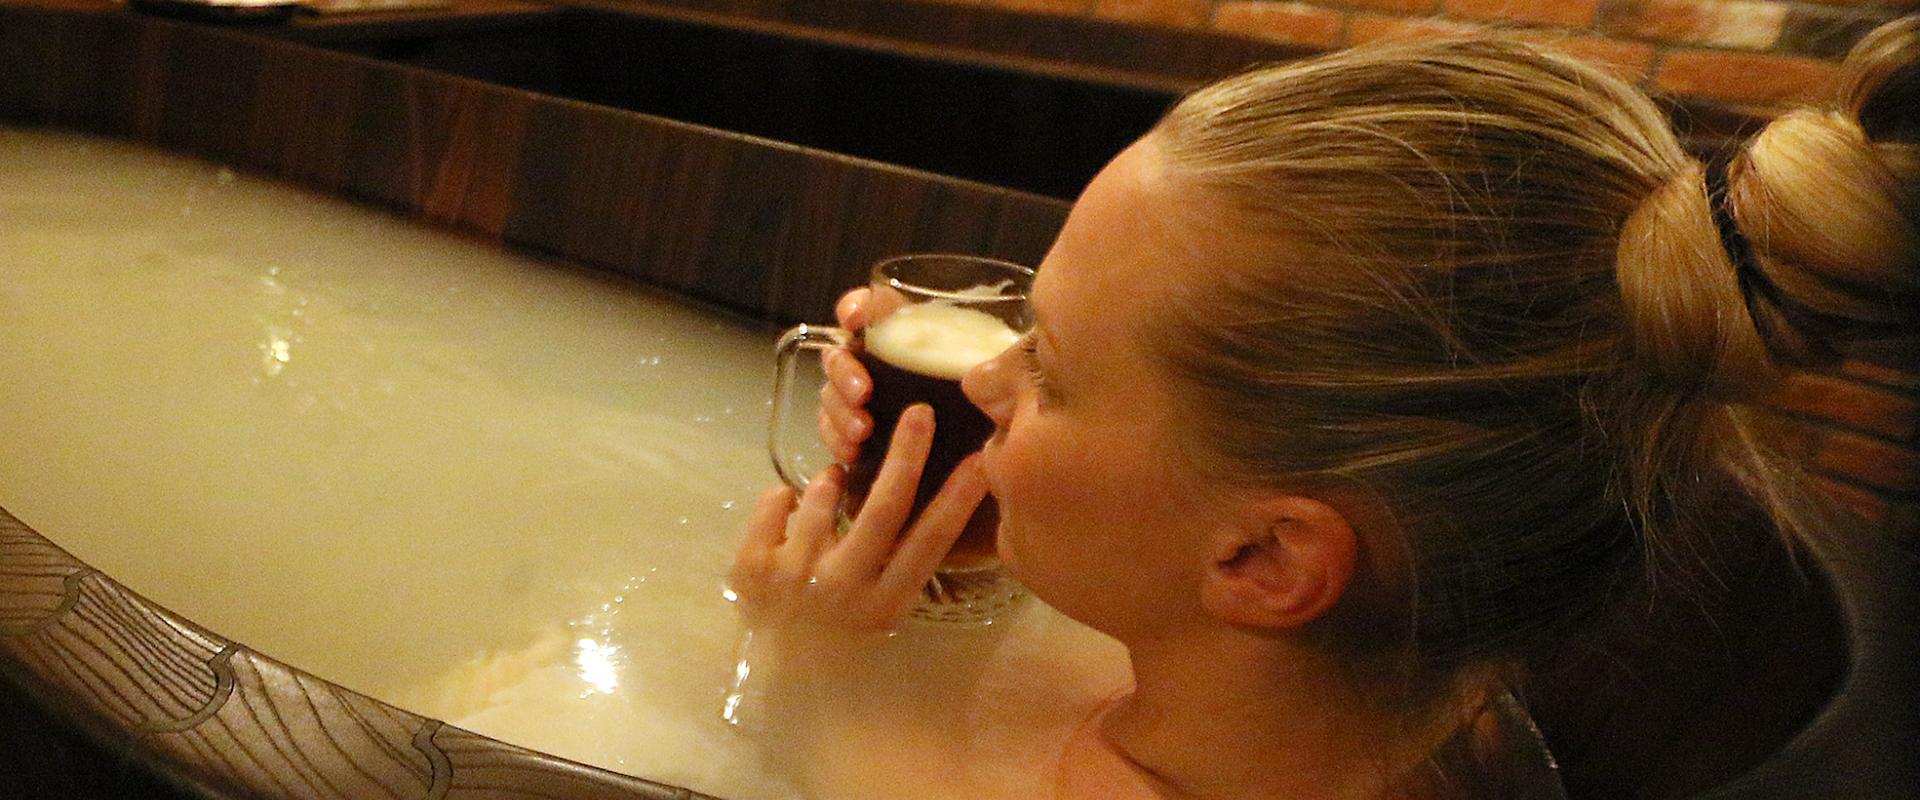 The first organic spa in Estonia in Viimsi Manor now also has the first beer spa in Estonia! In our private beer spa, you can enjoy a wood-burning sau